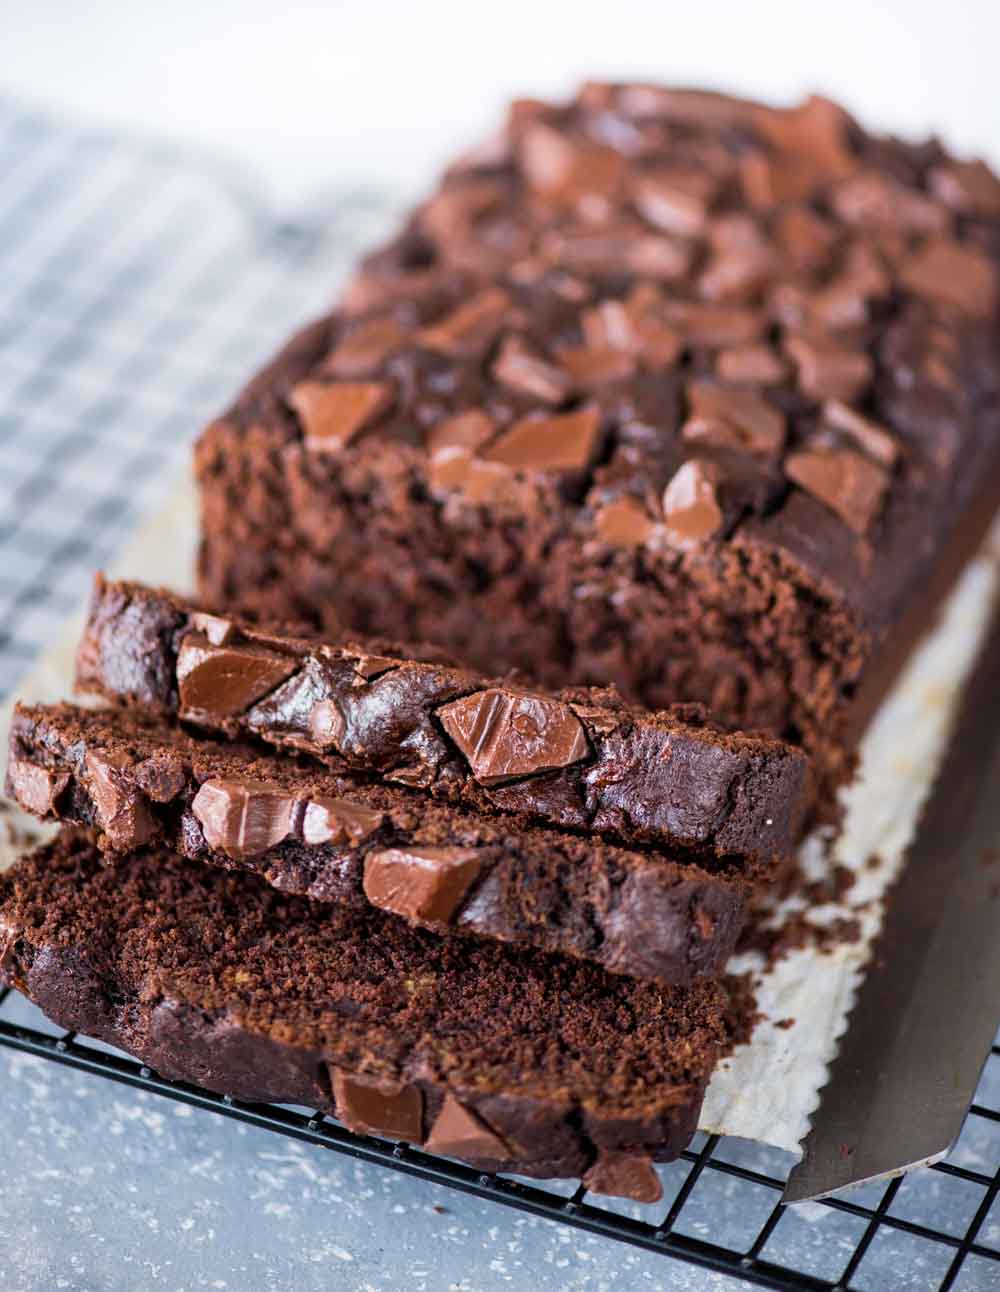 This chocolate banana bread is moist, fudgy and has the right balance of chocolate and banana flavour. With double the chocolate, every bite of this bread is such a treat.